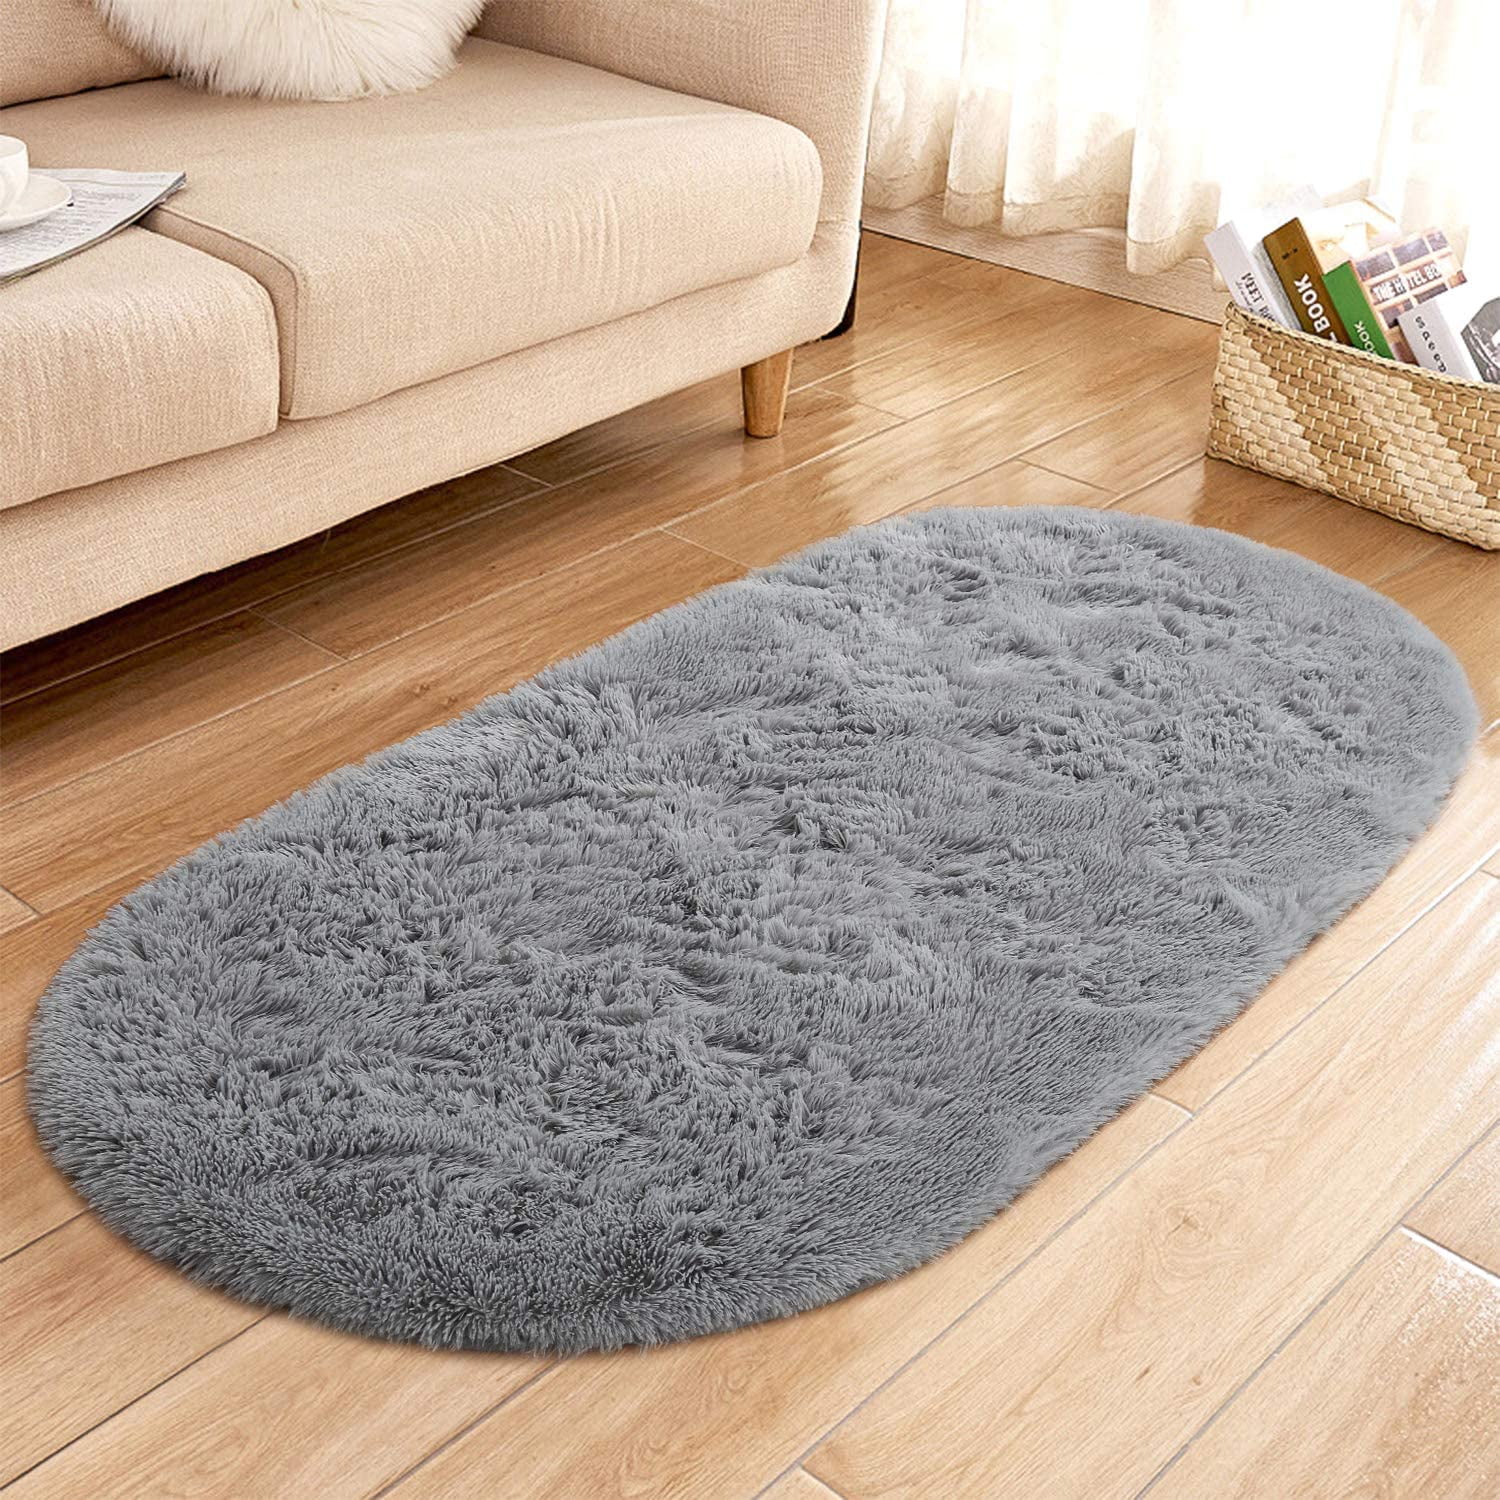 Soft Area Shaggy Rug Fluffly Anti Skid Non Shed Living Room Office DGrey 120x170 